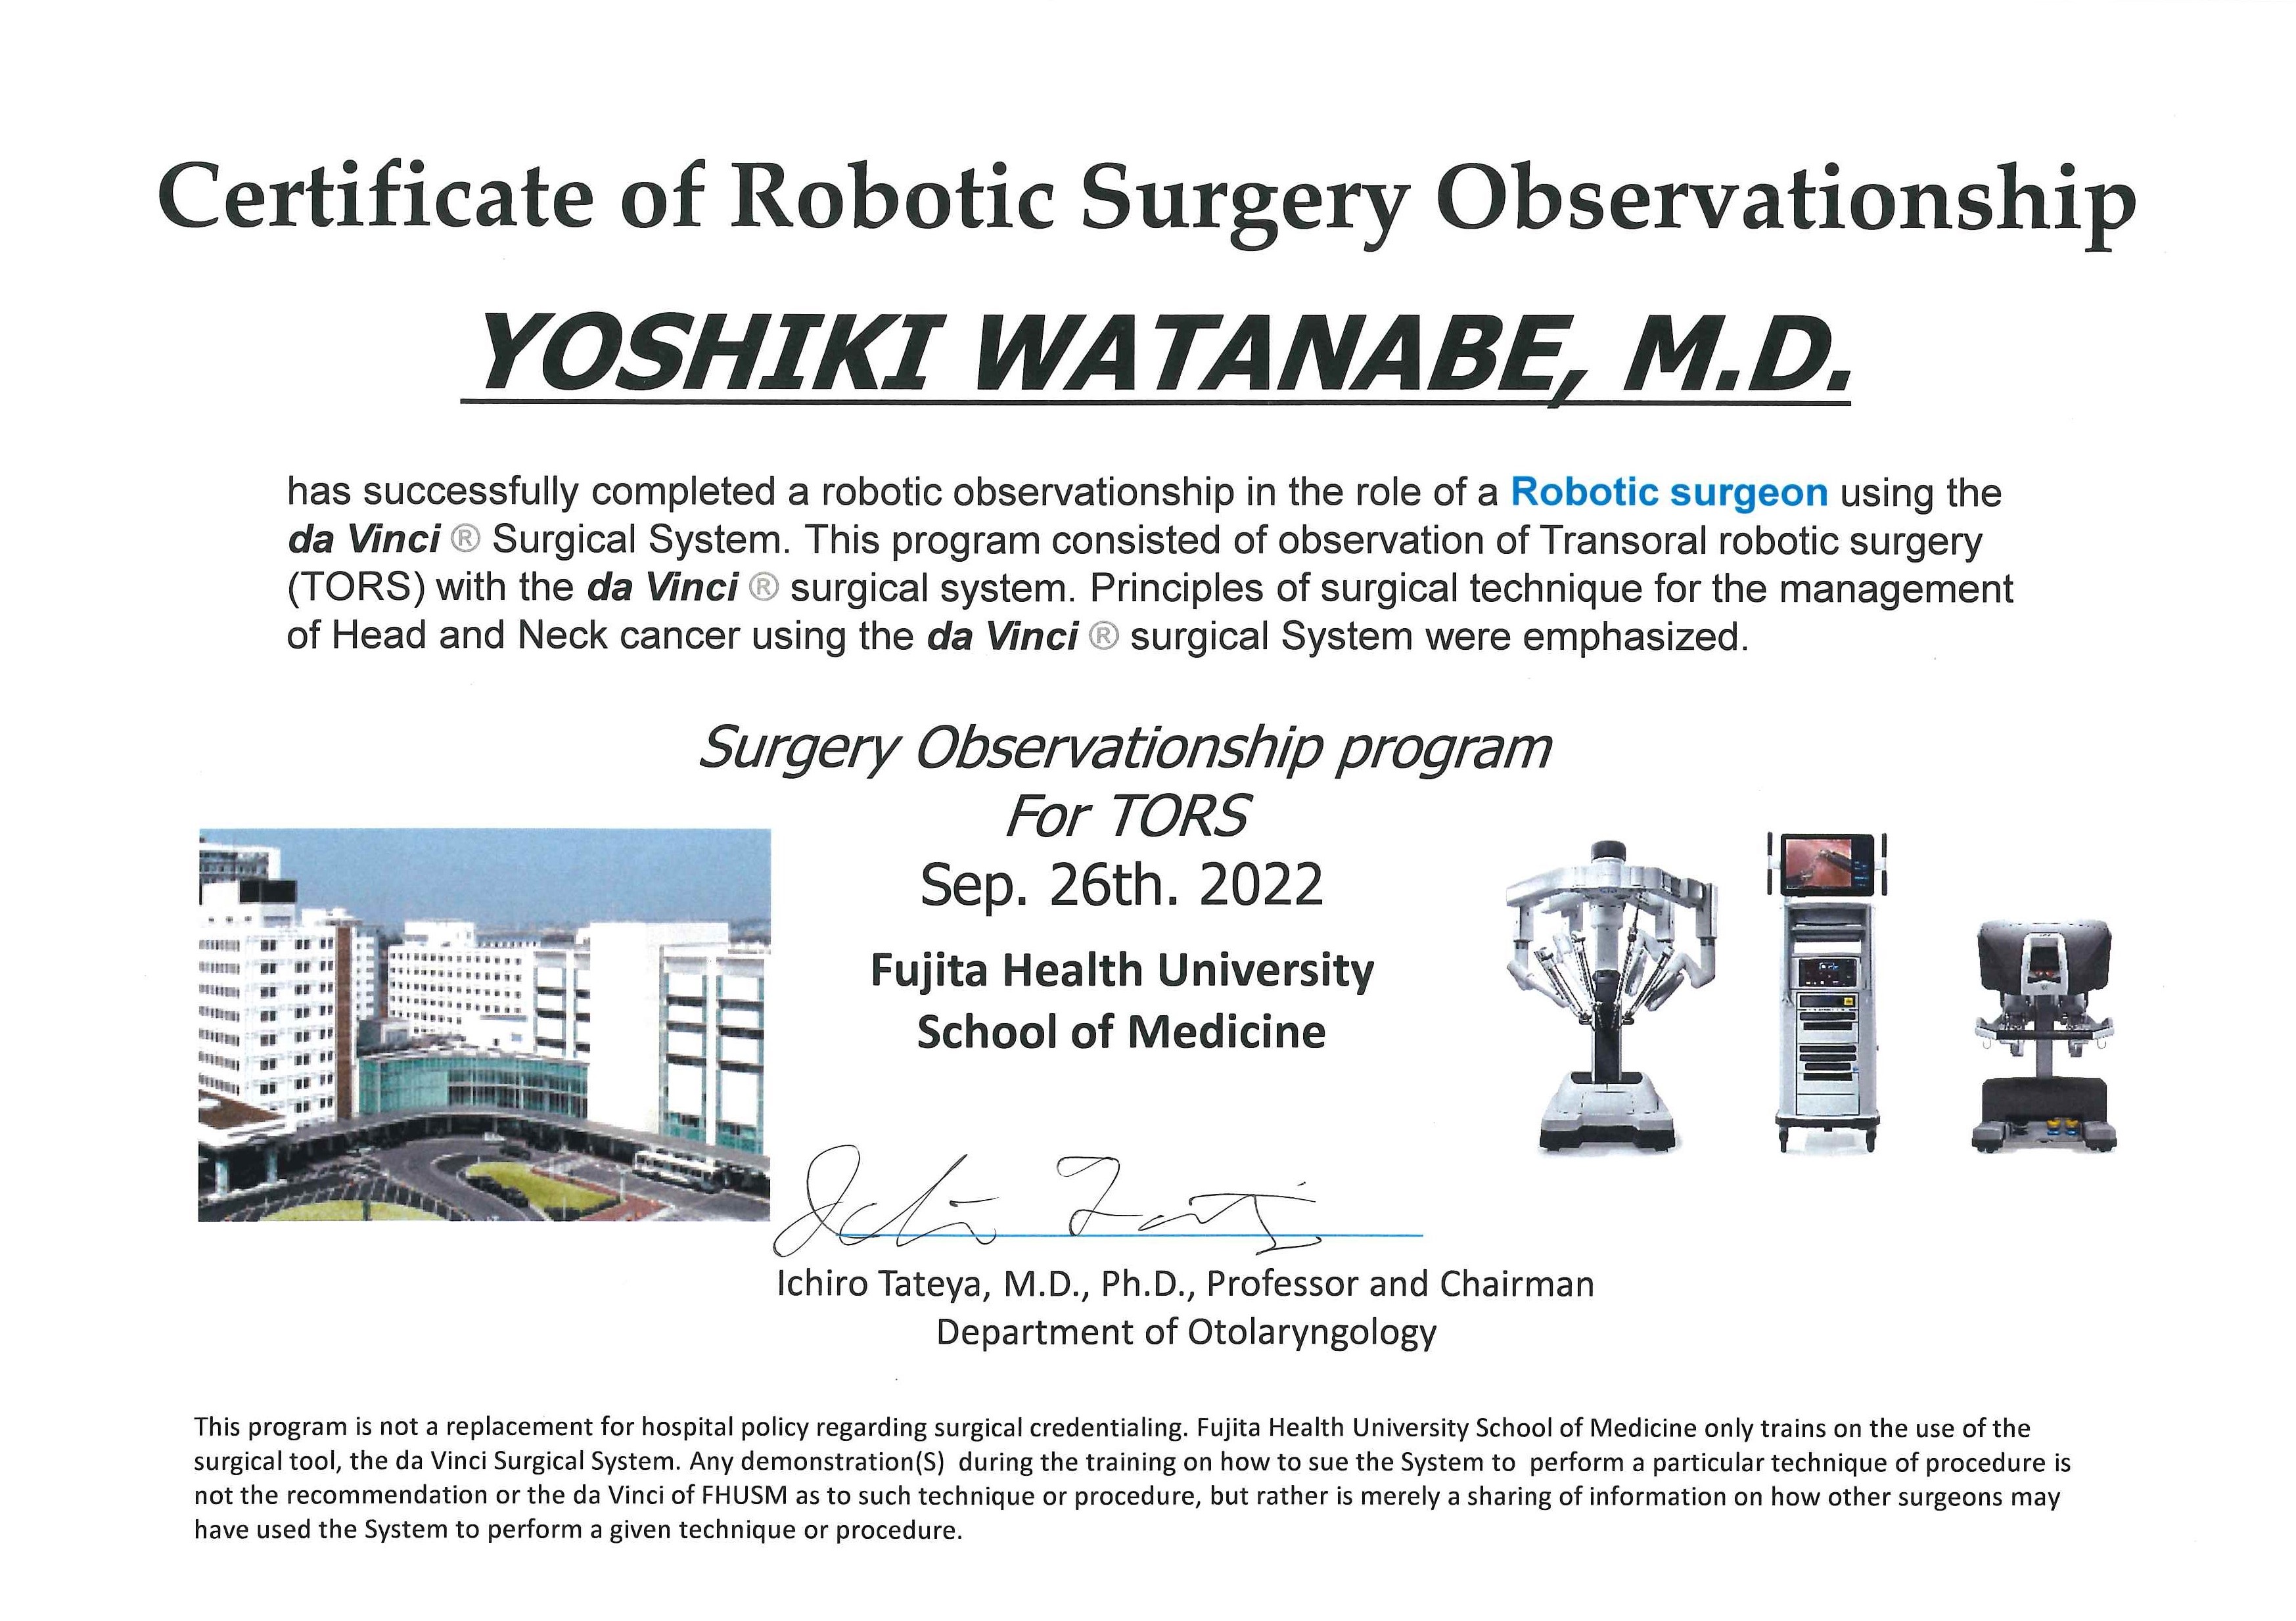 「Certificate of Robotic Surgery Observationship」